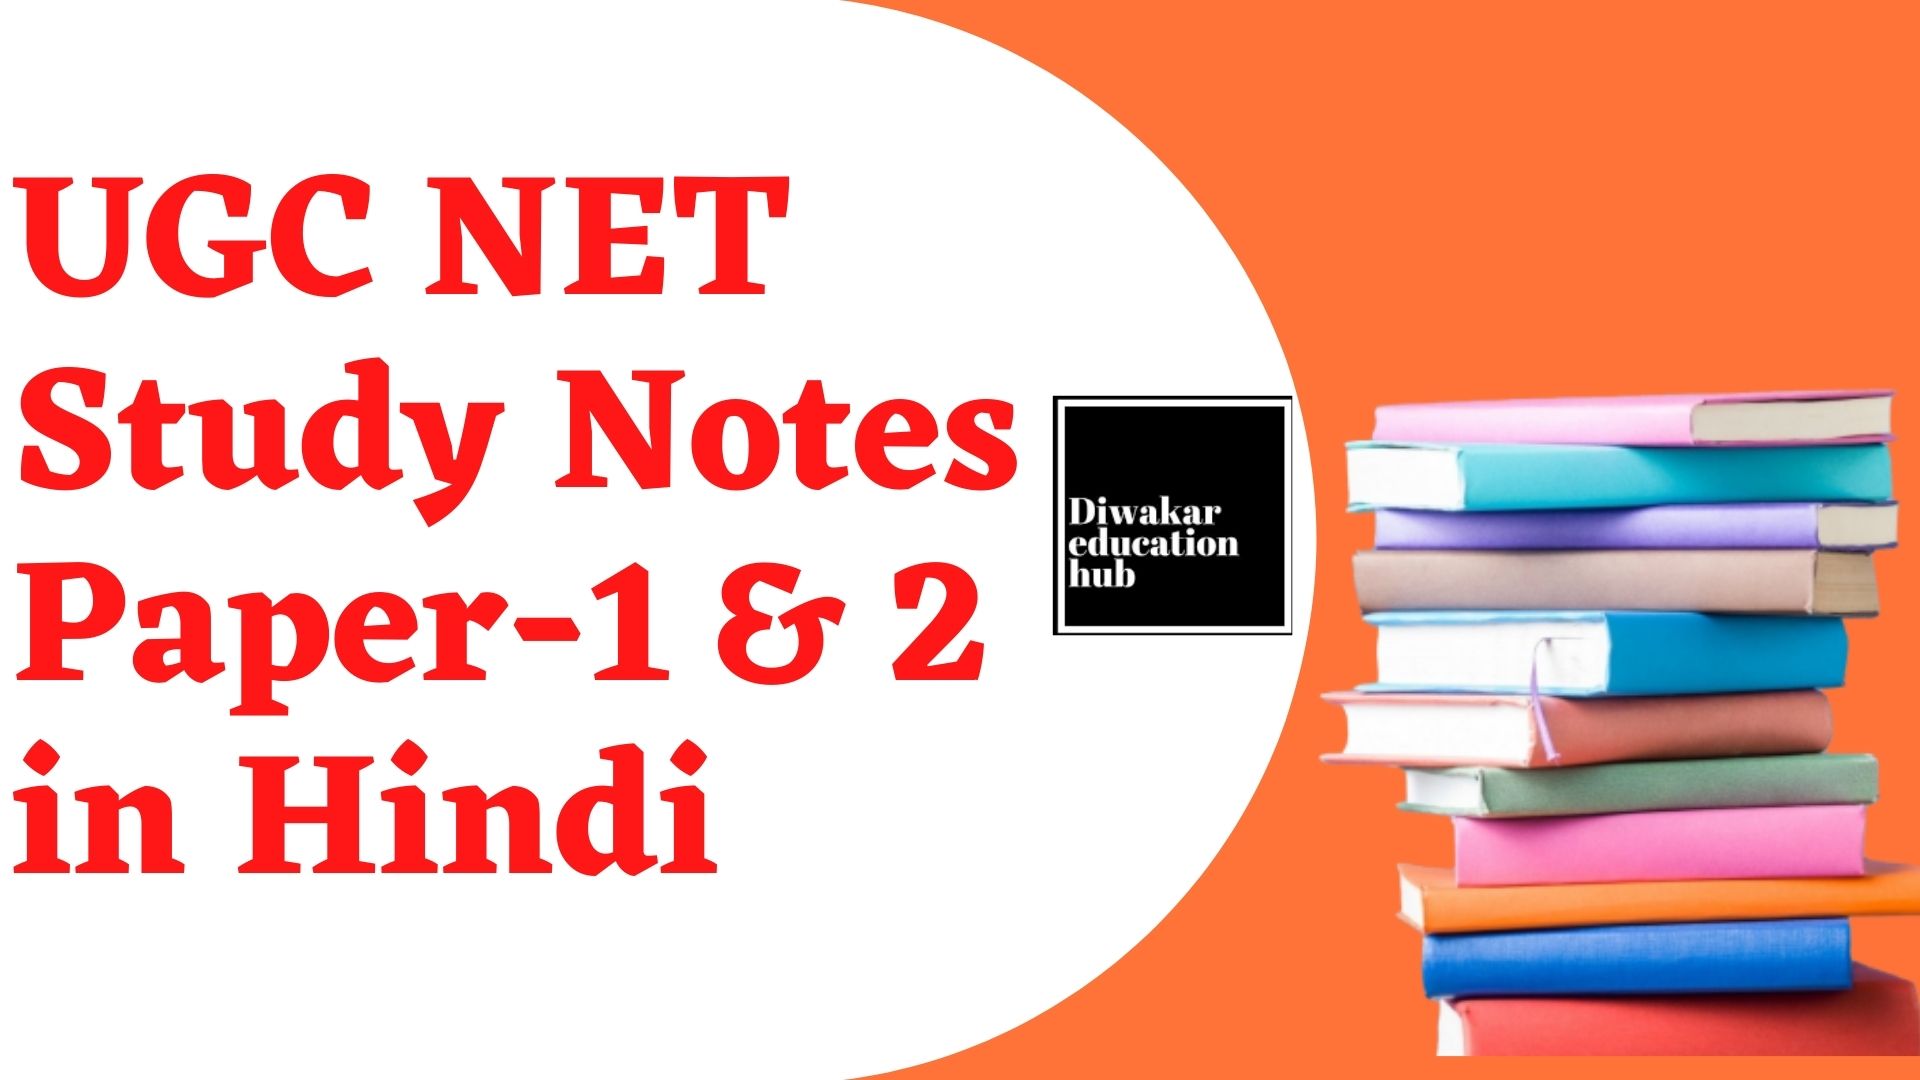 UGC NET Study Notes/ Study Material [in Hindi] Paper-1 & 2 [All Subjects] As Per Updated Syllabus